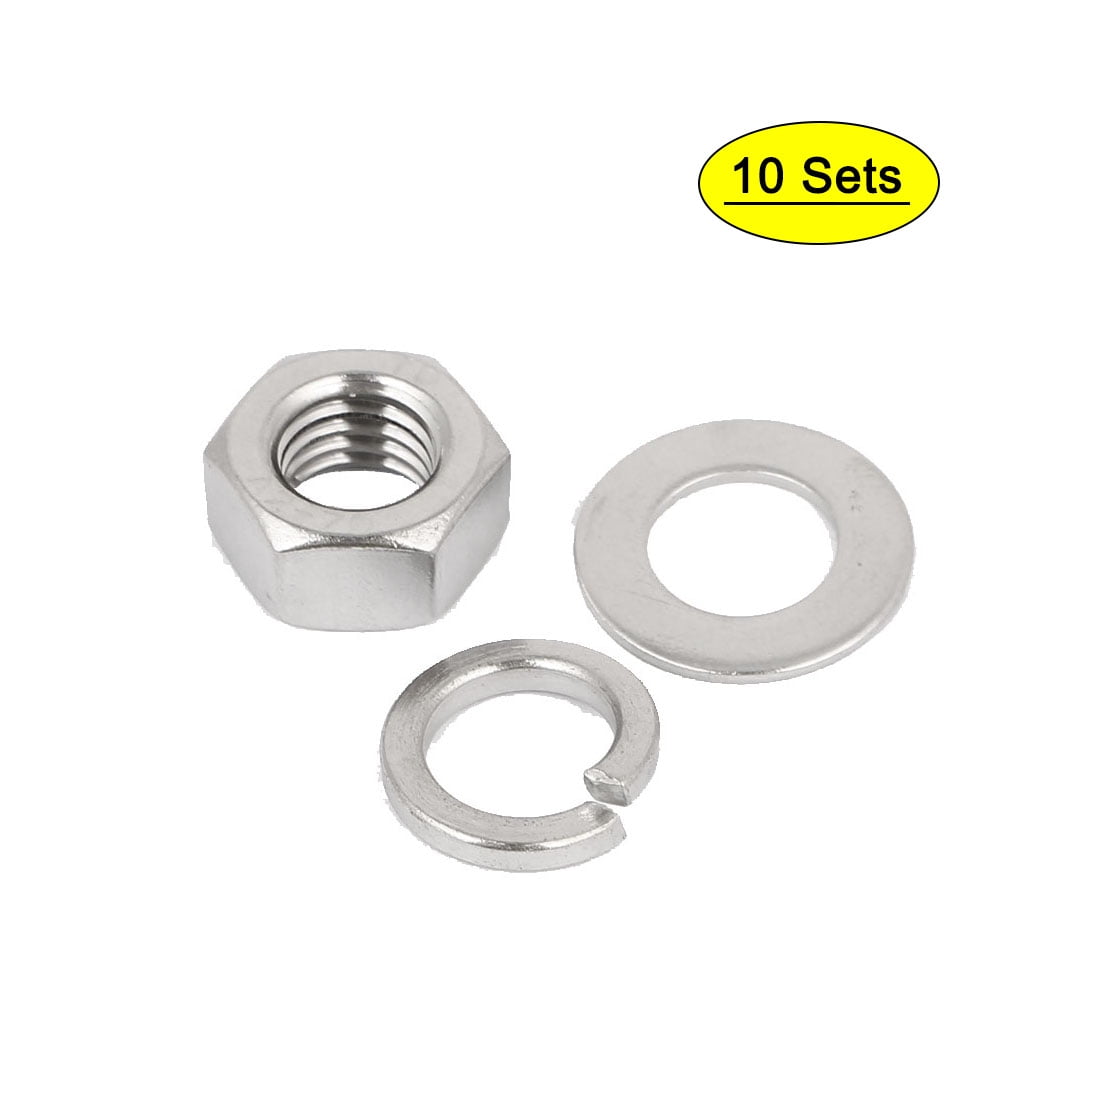 M7 Full Hex Nut Form A Washers and Penny Repair Washer 